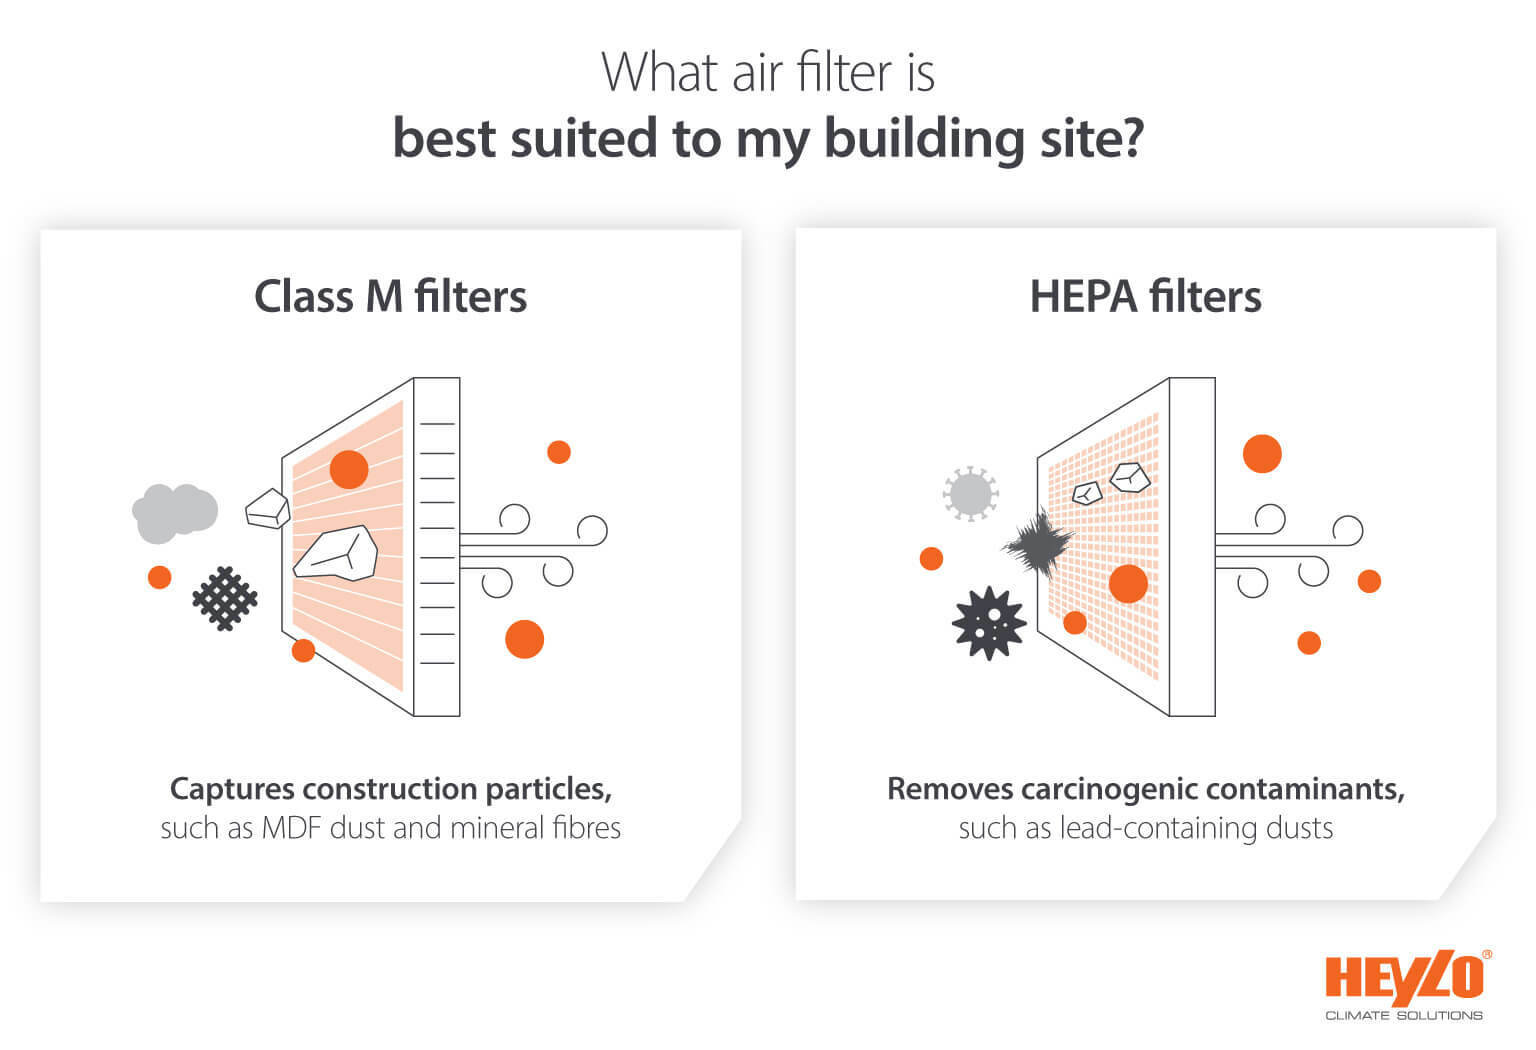 Infographic comparing Class M filters vs HEPA filters for removing building site dust particles and contaminants